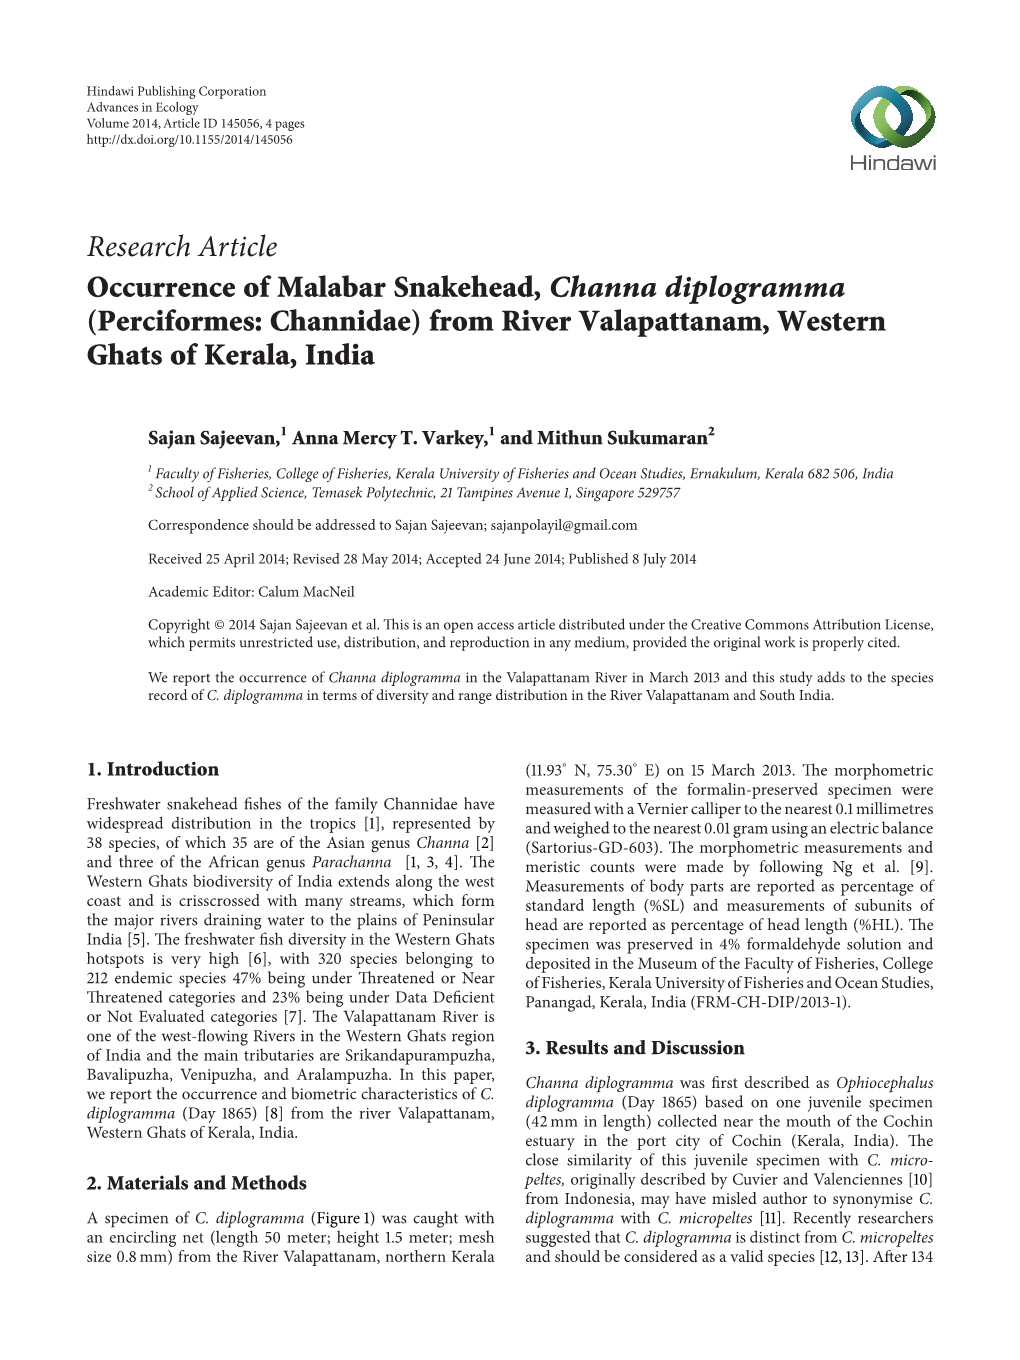 Occurrence of Malabar Snakehead, Channa Diplogramma (Perciformes: Channidae) from River Valapattanam, Western Ghats of Kerala, India